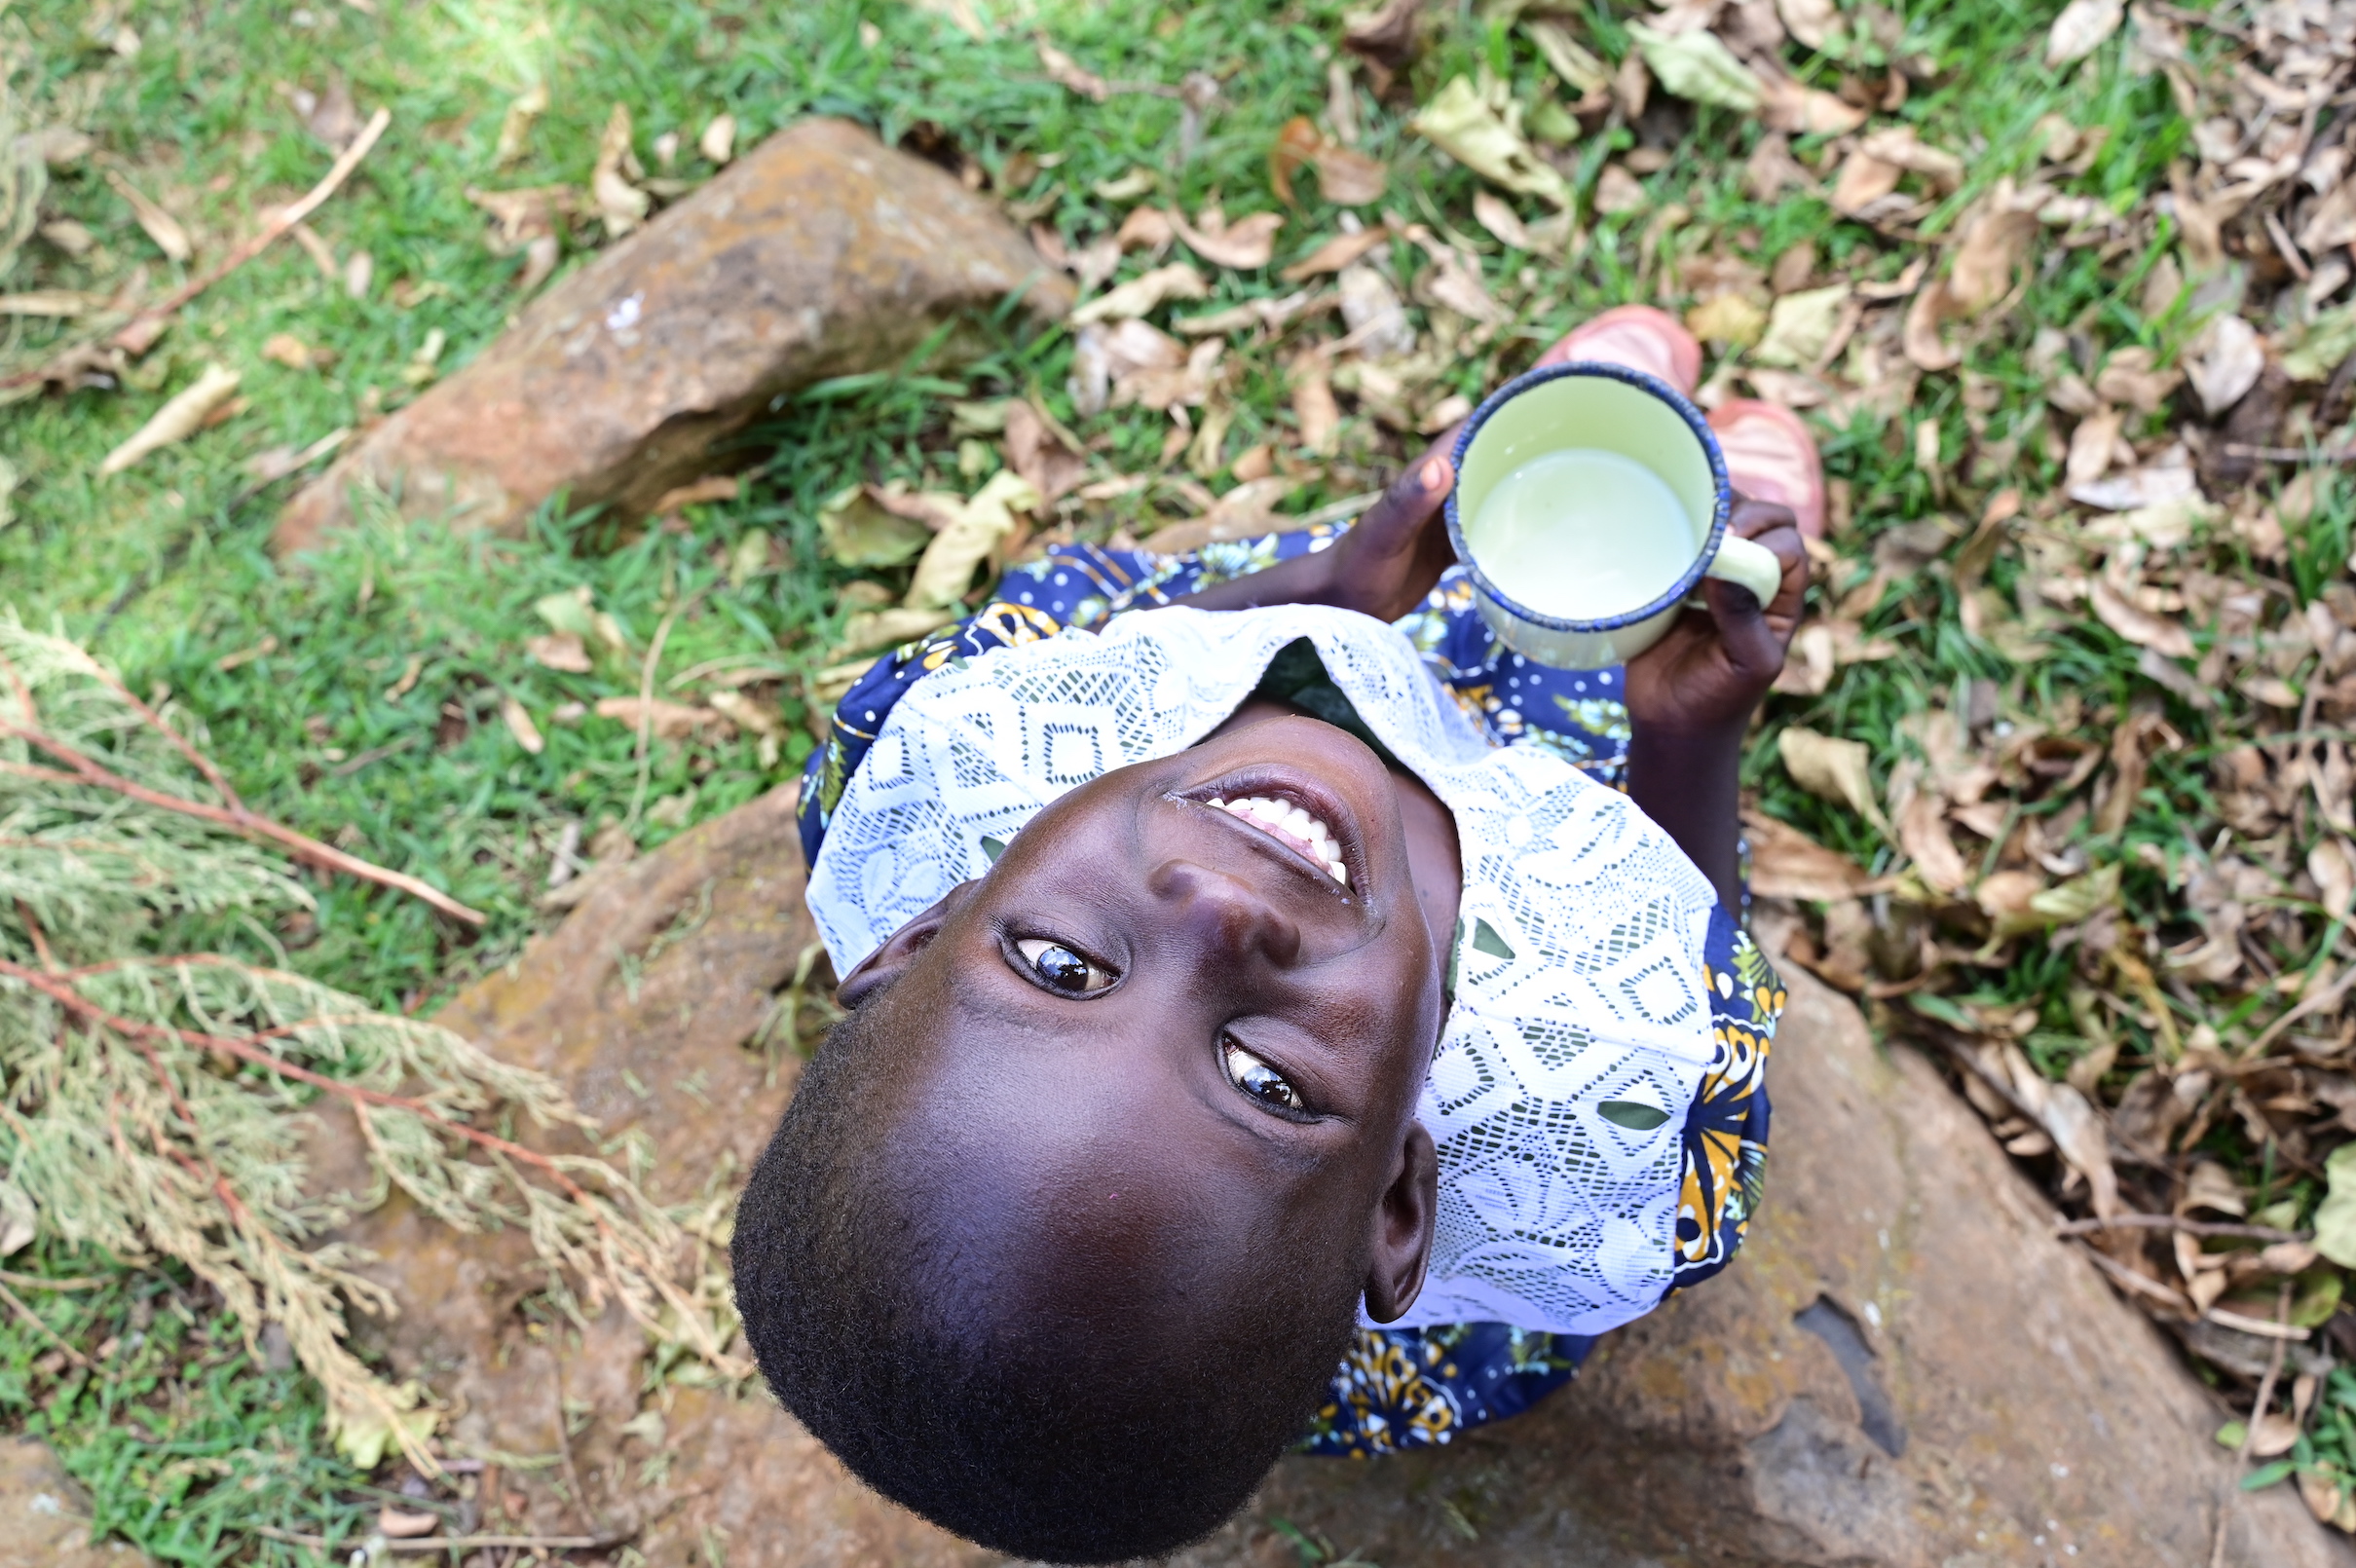 Lazarus’ grand-daughter, Velmur aged 4 enjoys drinking nutritious milk that is  important for development of strong, healthy bones and teeth. ©World Vision photo/Hellen Owuor.